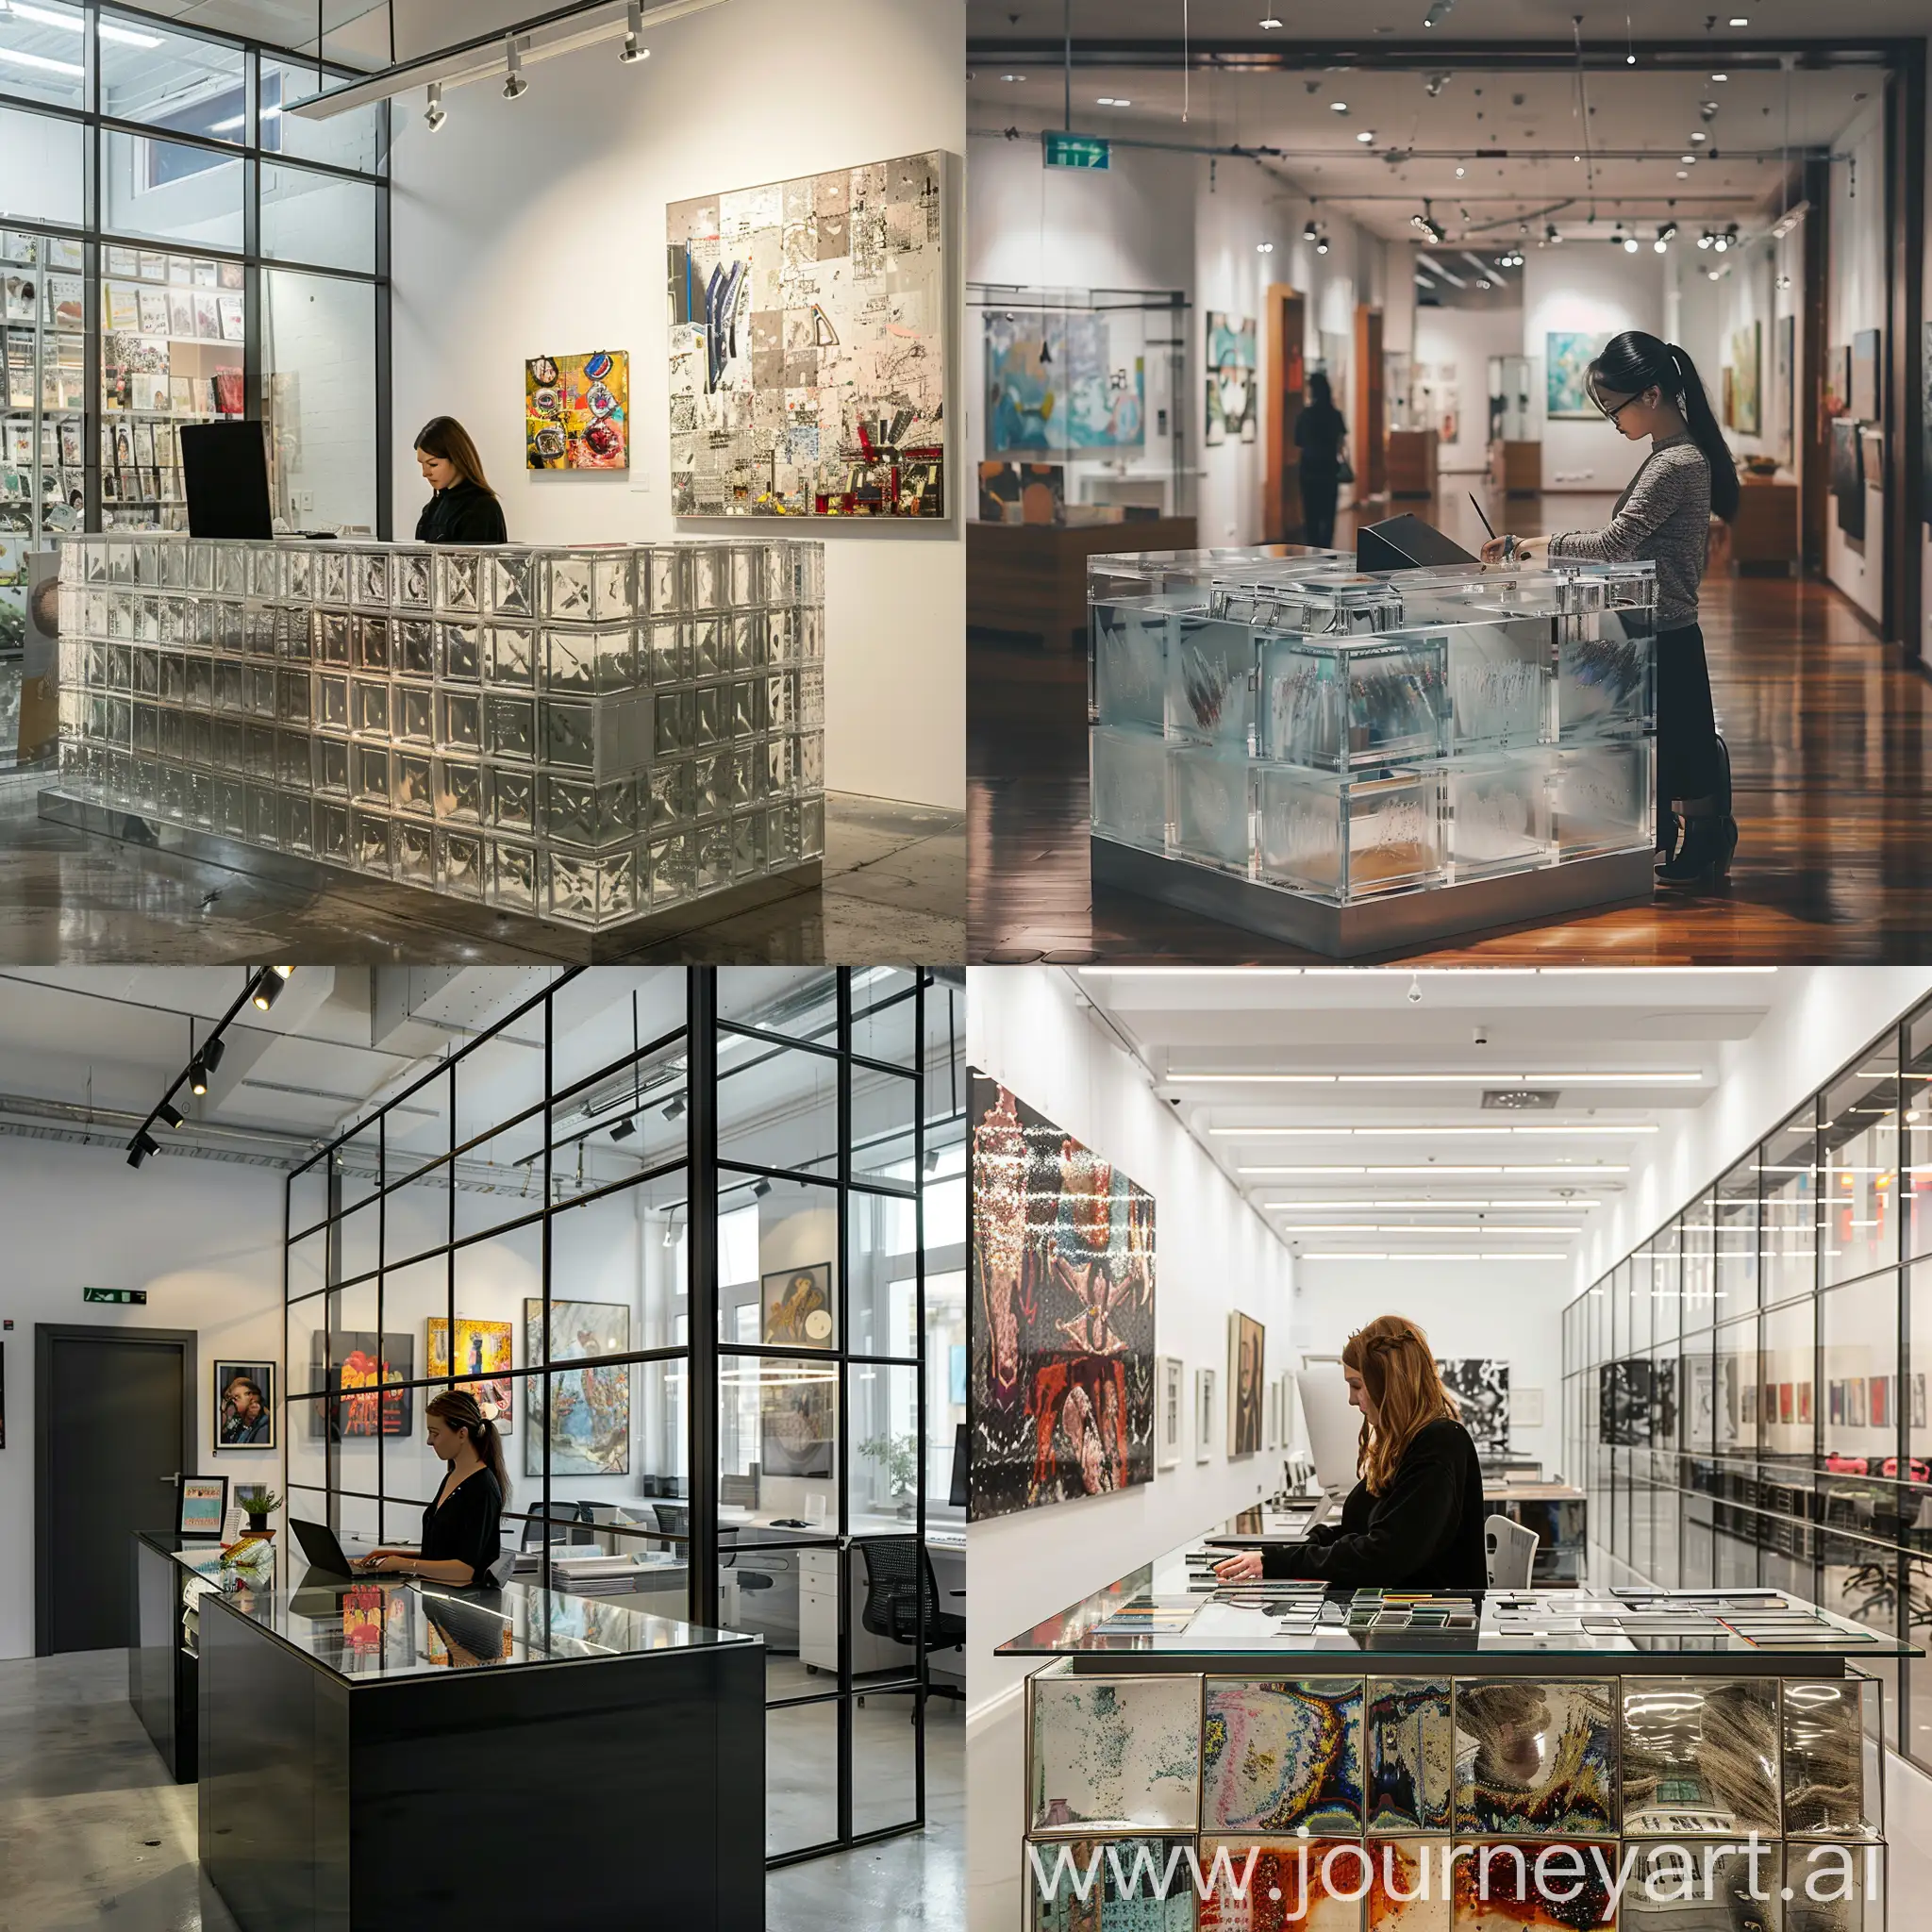 woman working in gallery shows art behind the desk covered in glass in the office style building